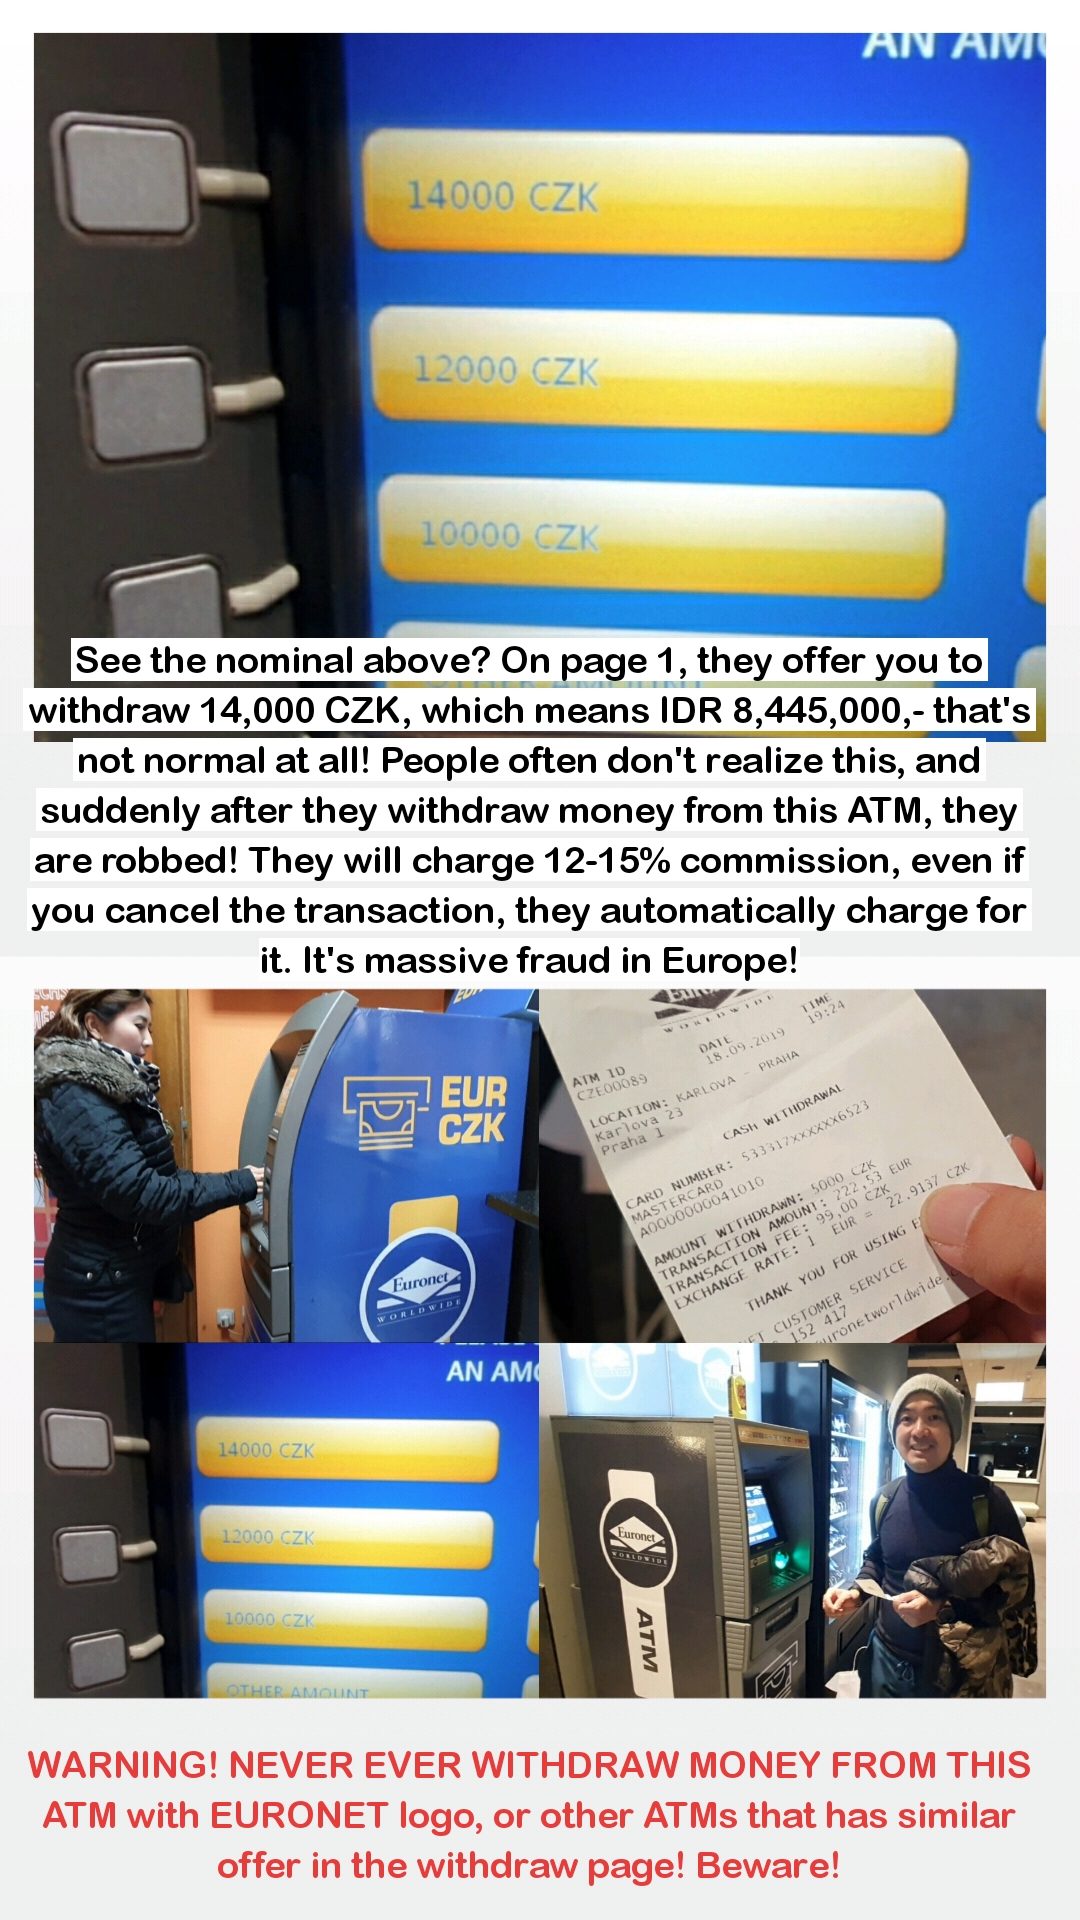 Avoid EURONET ATM massive fraud in Europe - Travel Tips how to avoid scammer by Myfunfoodiary